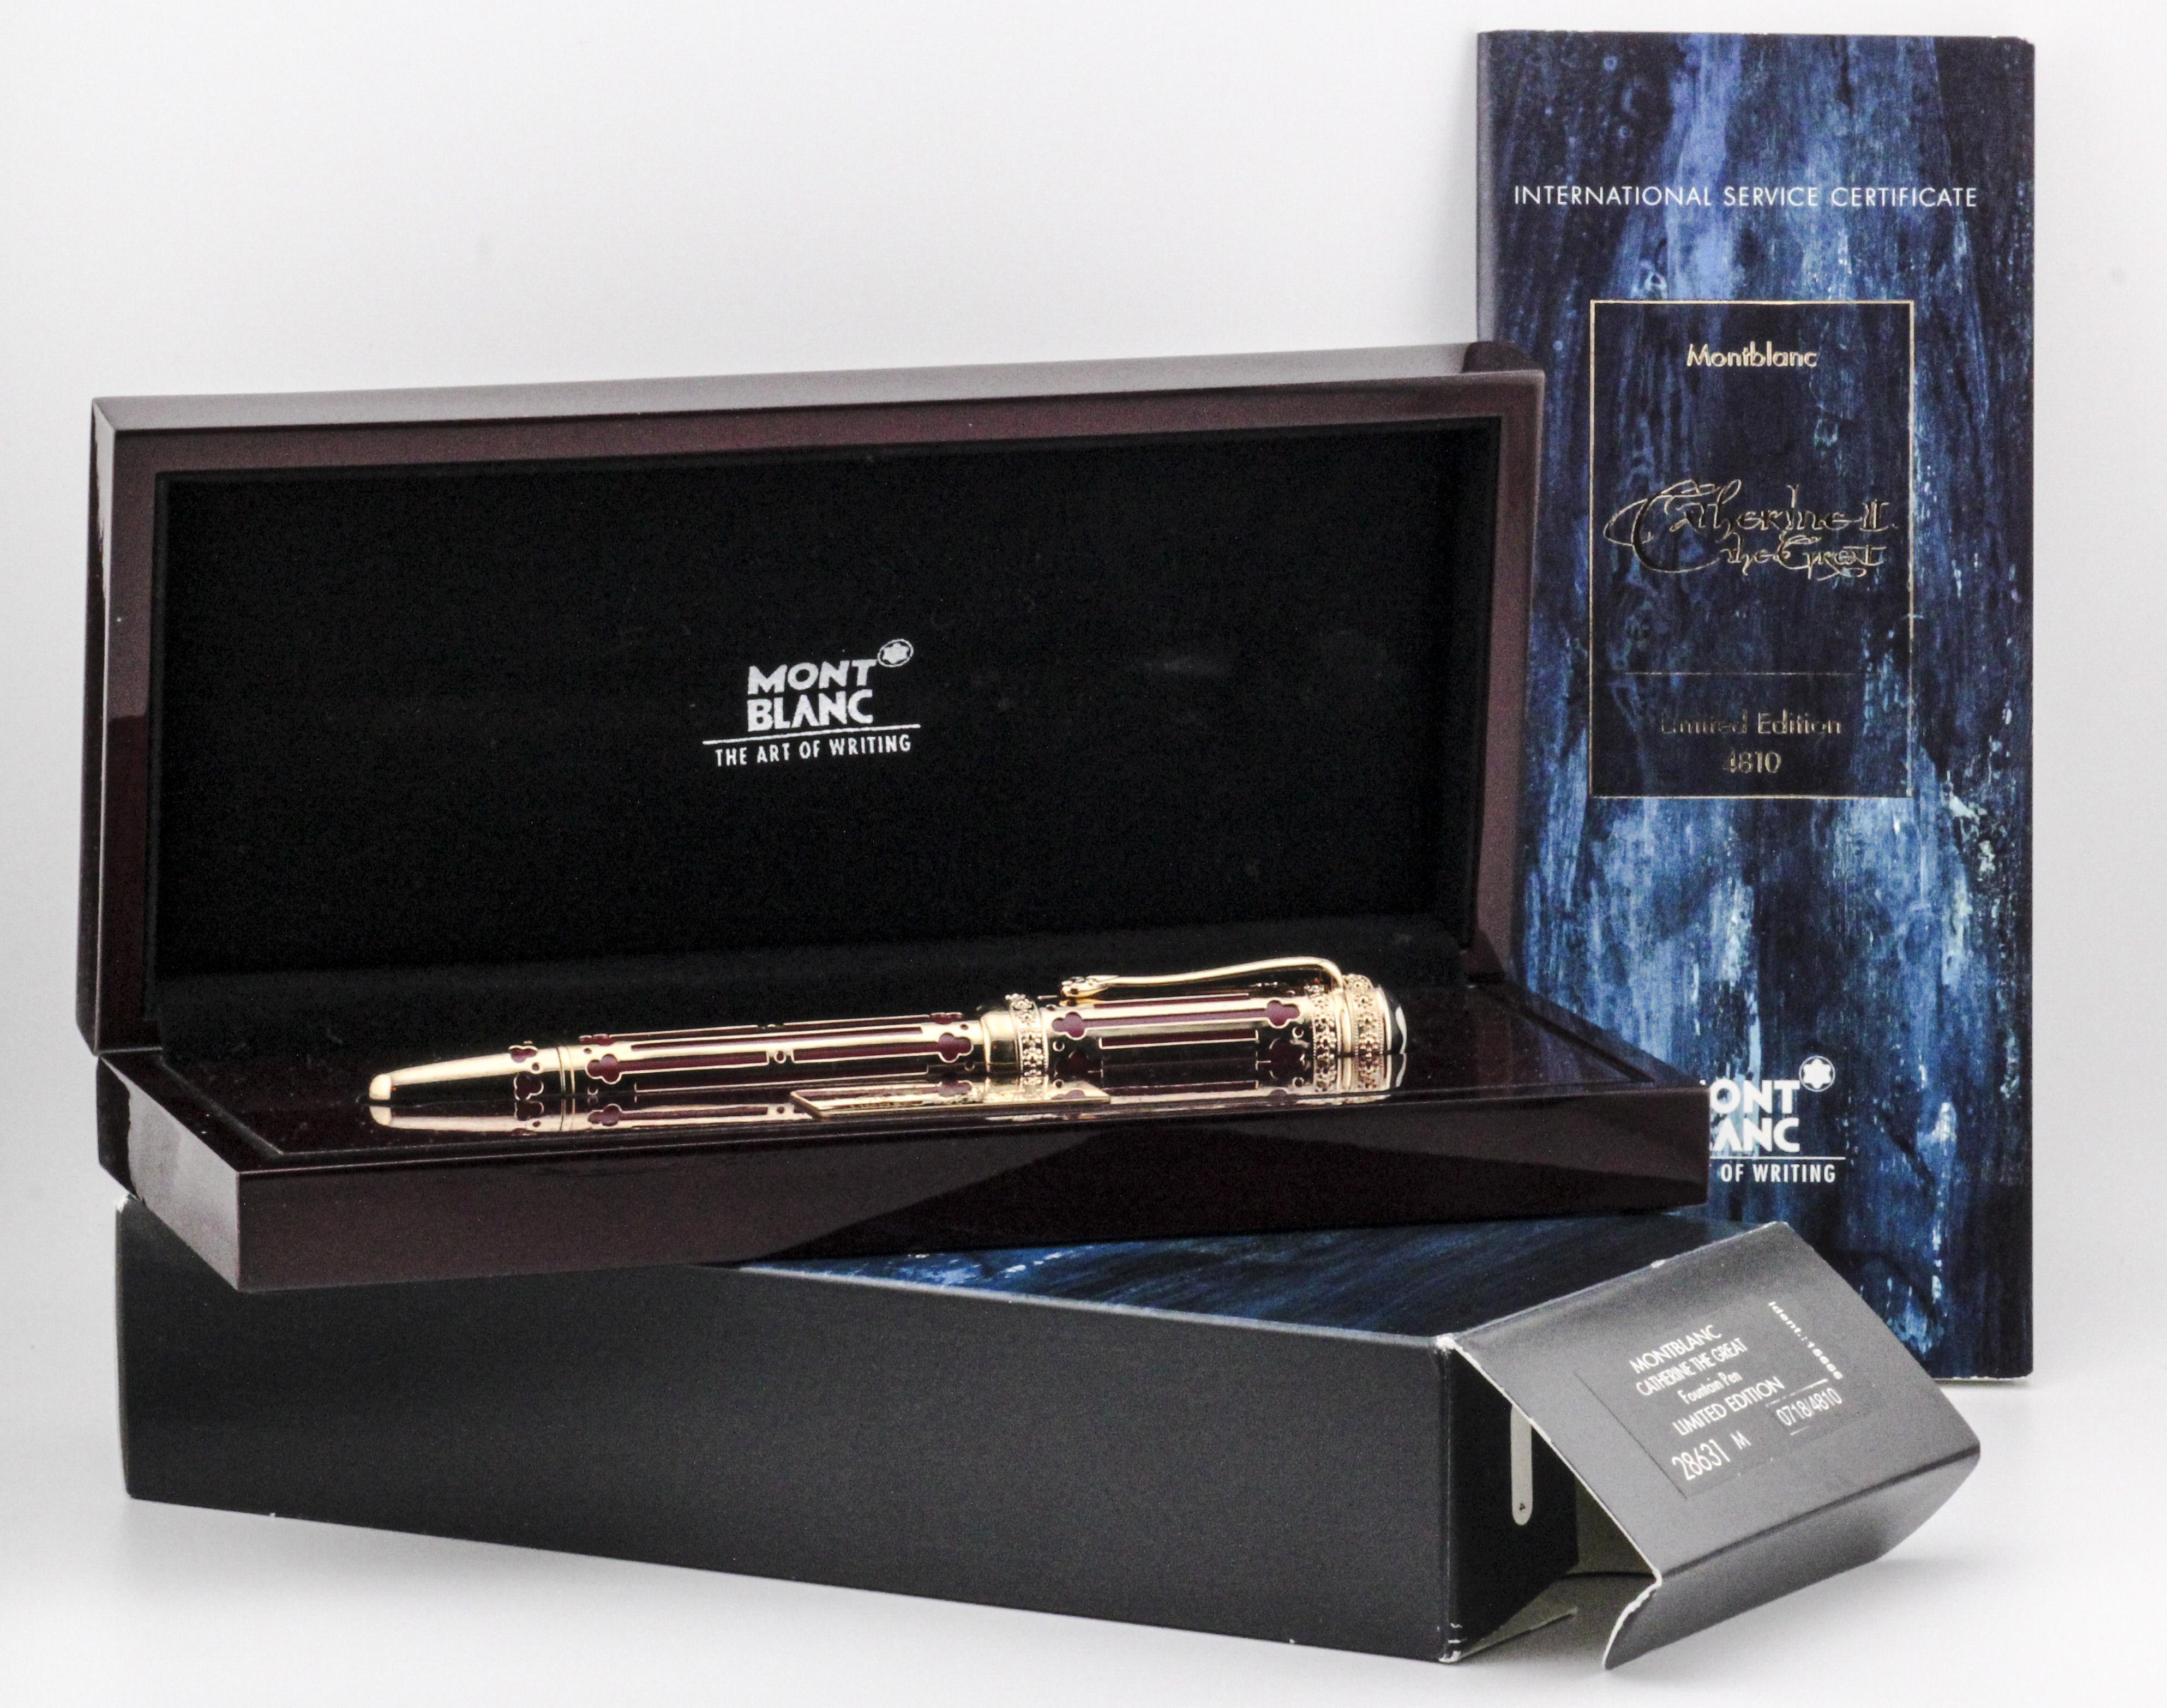 The Montblanc Patron of the Art Edition Catherine the Great Fountain Pen pays homage to one of history's most influential figures, the illustrious Empress of Russia, Catherine the Great. This opulent writing instrument embodies the grandeur and